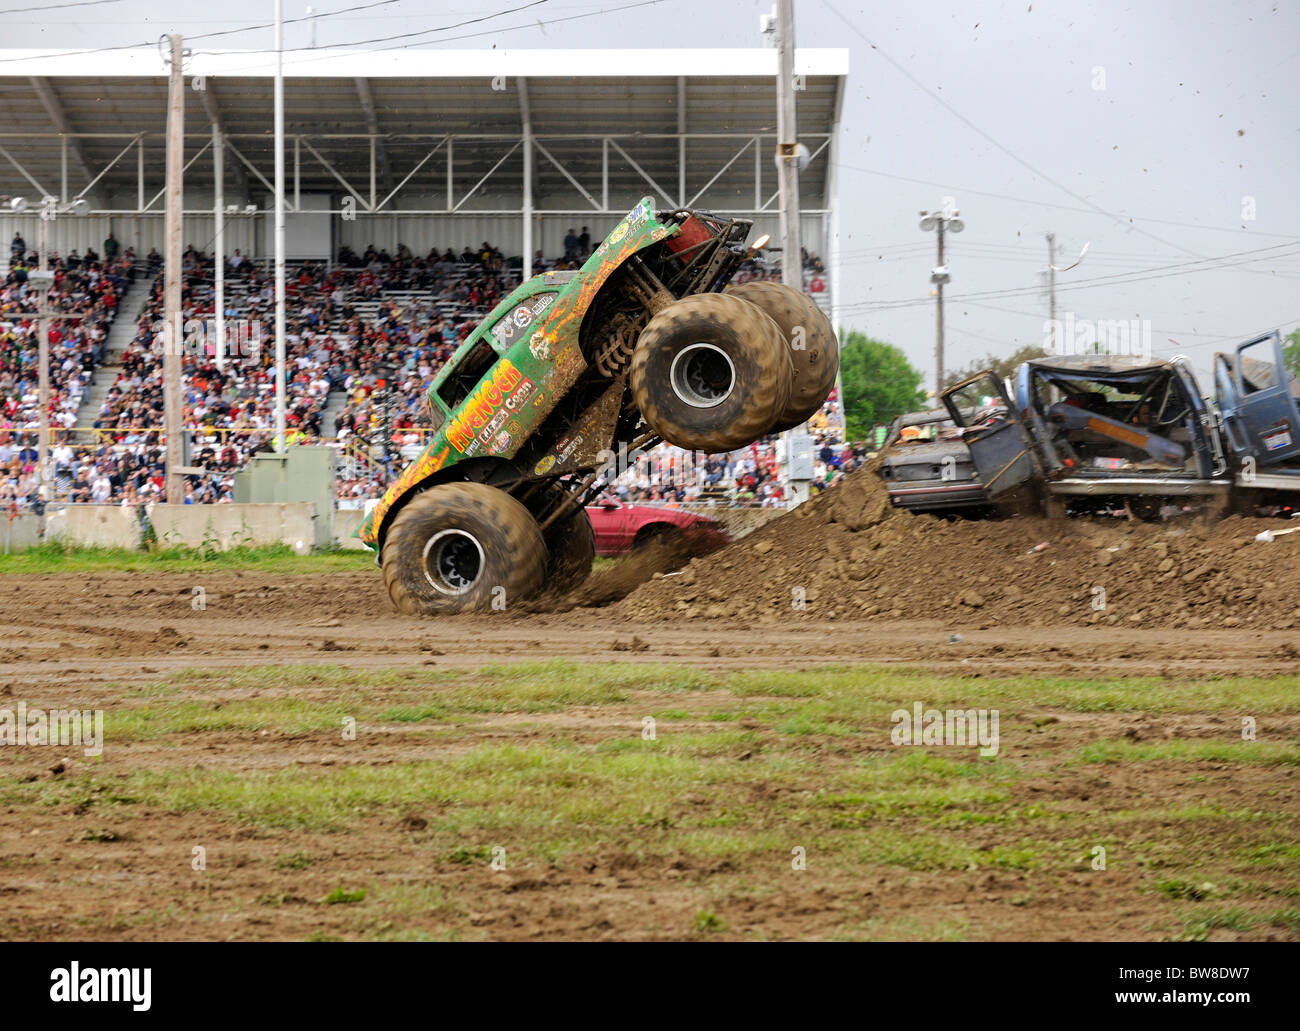 Monster Truck Avenger at freestyle competition at 4x4 Off-Road Jamboree  Monster Truck Show at Lima, Ohio Stock Photo - Alamy